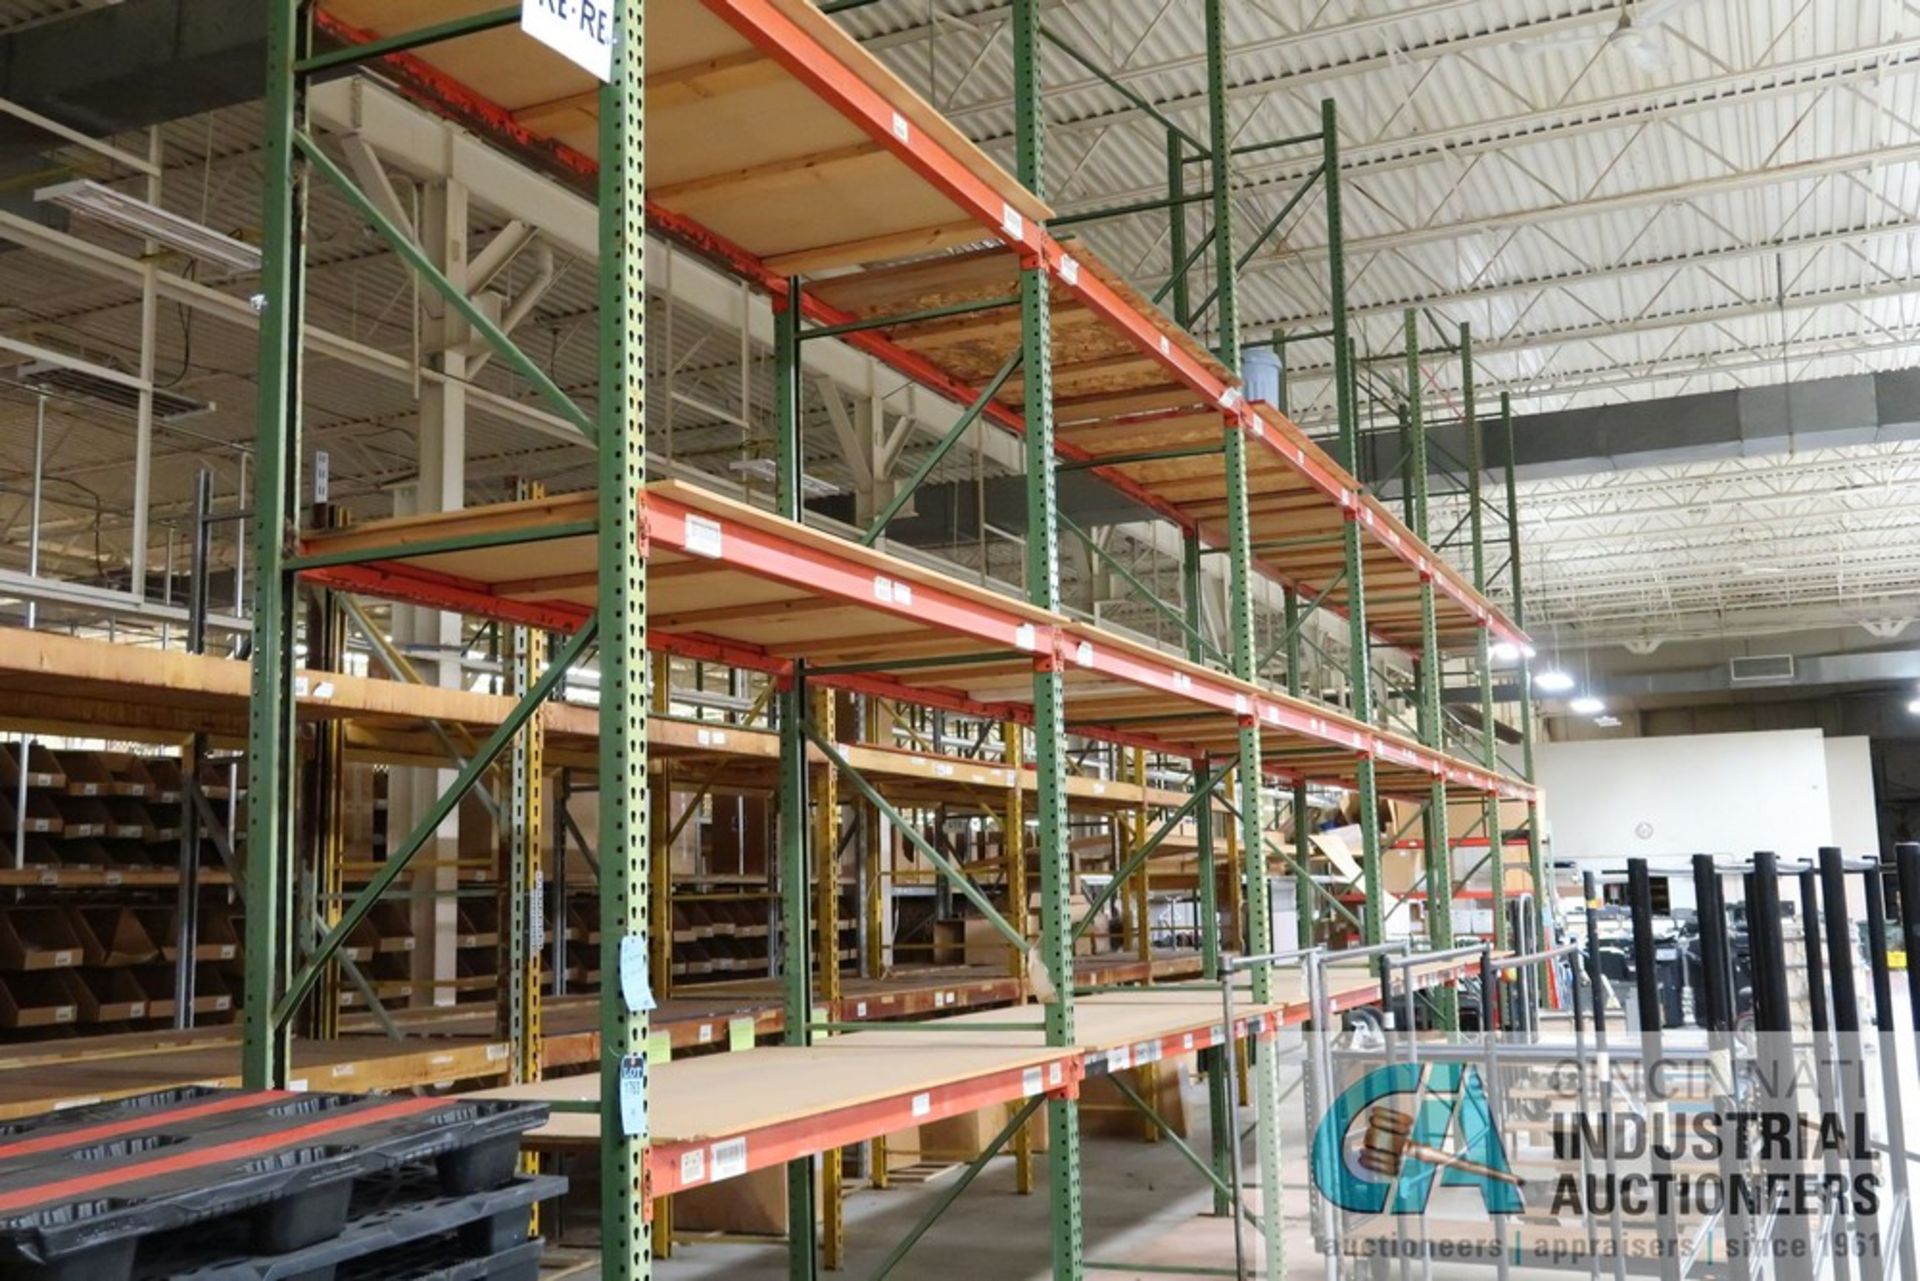 SECTIONS 48" X 96" X 20' PALLET RACK, (3) SHELVES PER SECTION WITH (36) BEAMS AND (18) SHEETS 4' X